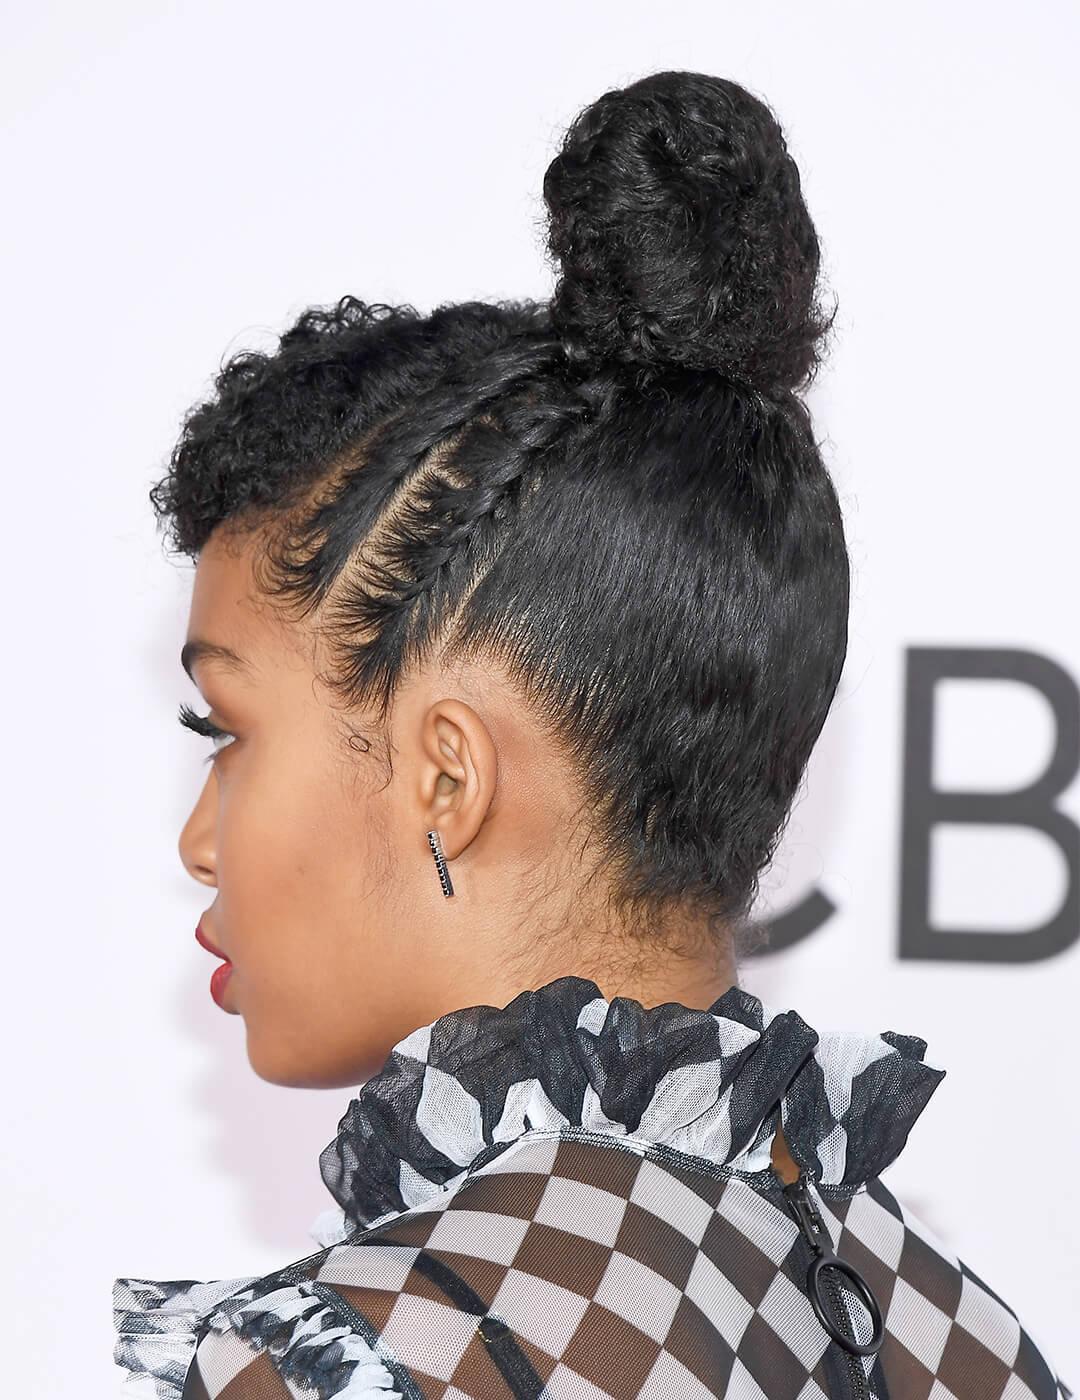 Yara Shahidi in a checkered black and white dress showing the back of her top knot and cornrows hairstyle